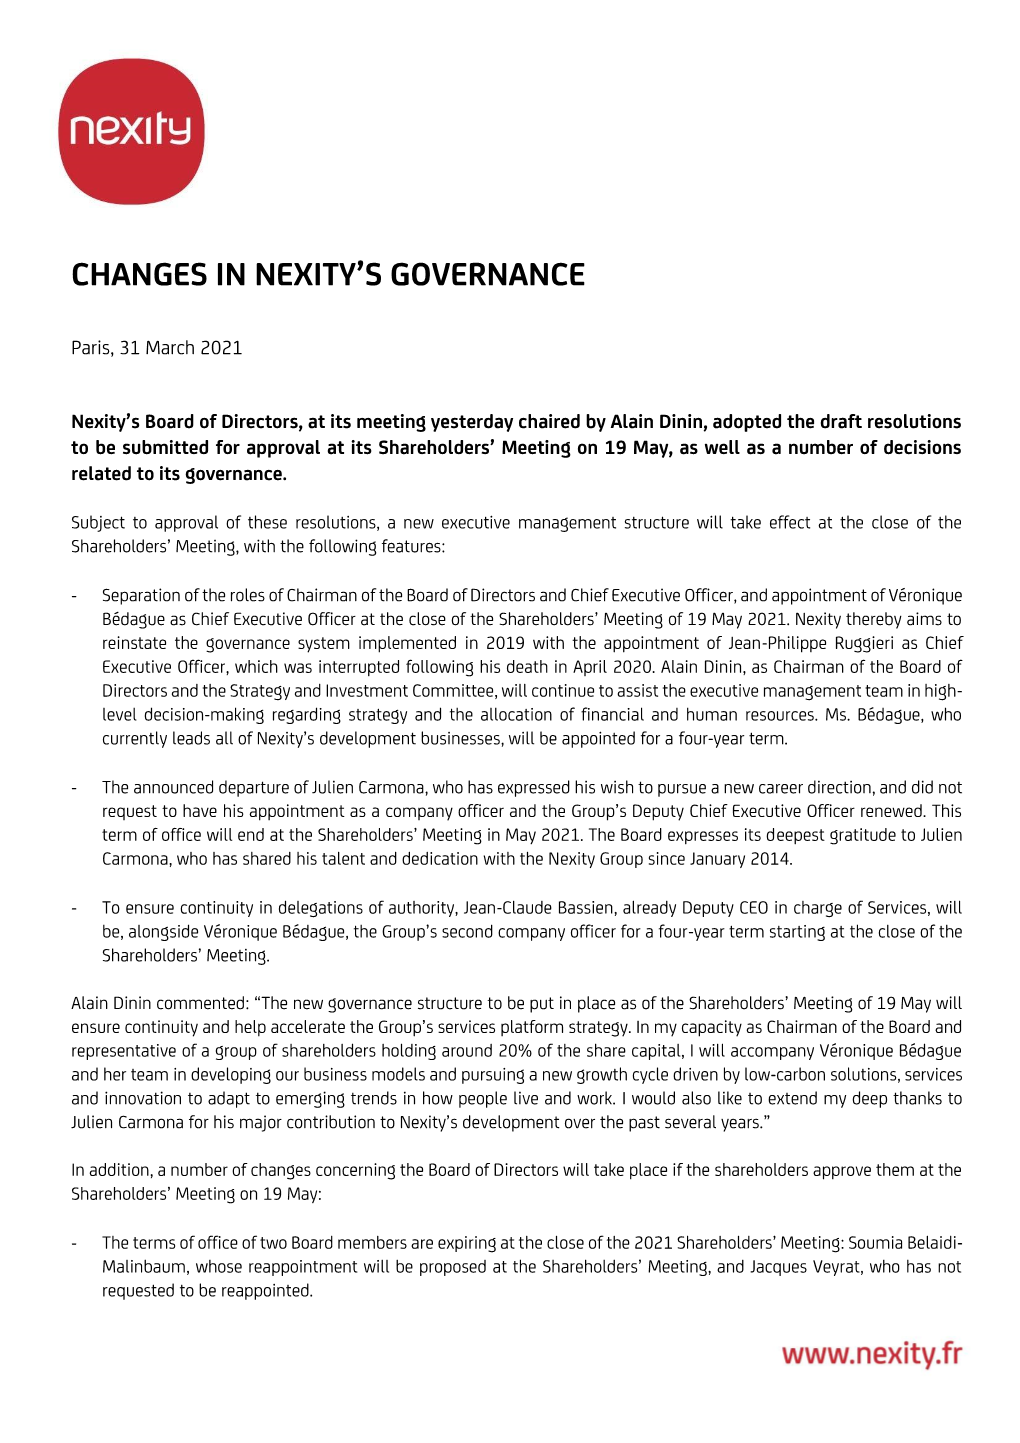 Changes in Nexity's Governance